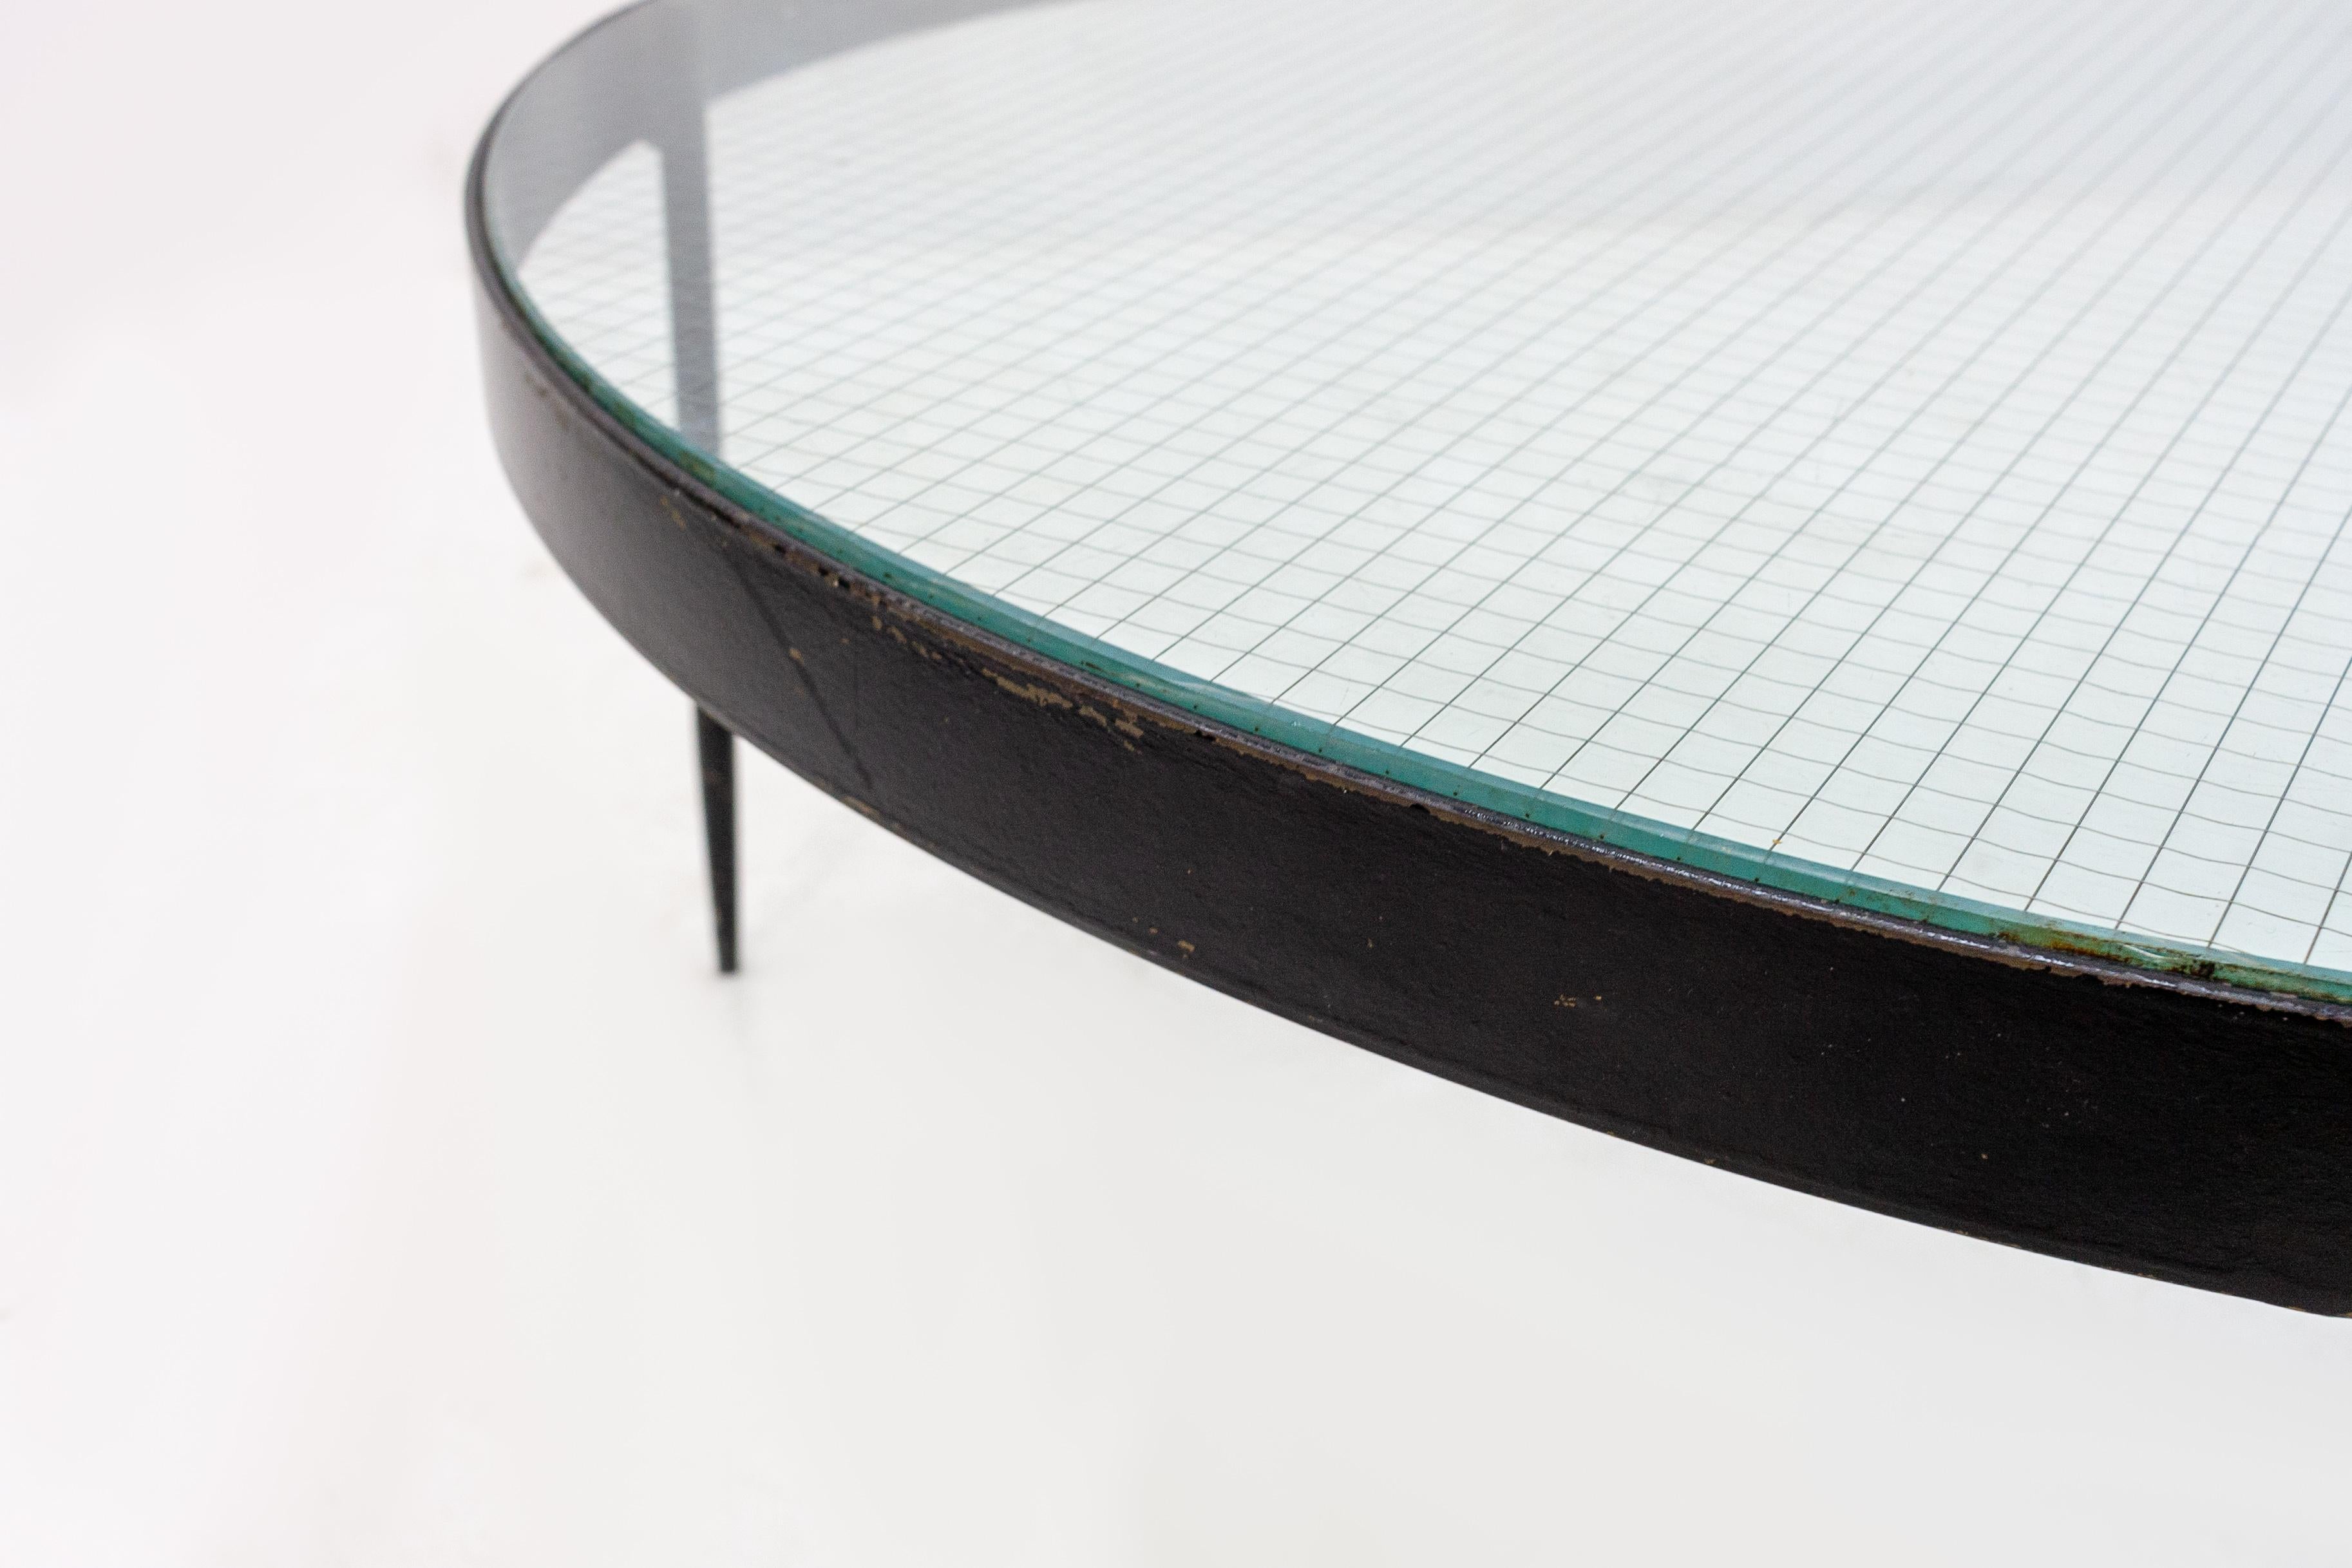 Round coffee table designed by Janni van Pelt for Bas van Belt, Netherlands 1958. Made of wire reinforced glass with three delicate tapered legs, the table is the height of minimalism in materials and aesthetics. A functionalism born of Bauhaus.